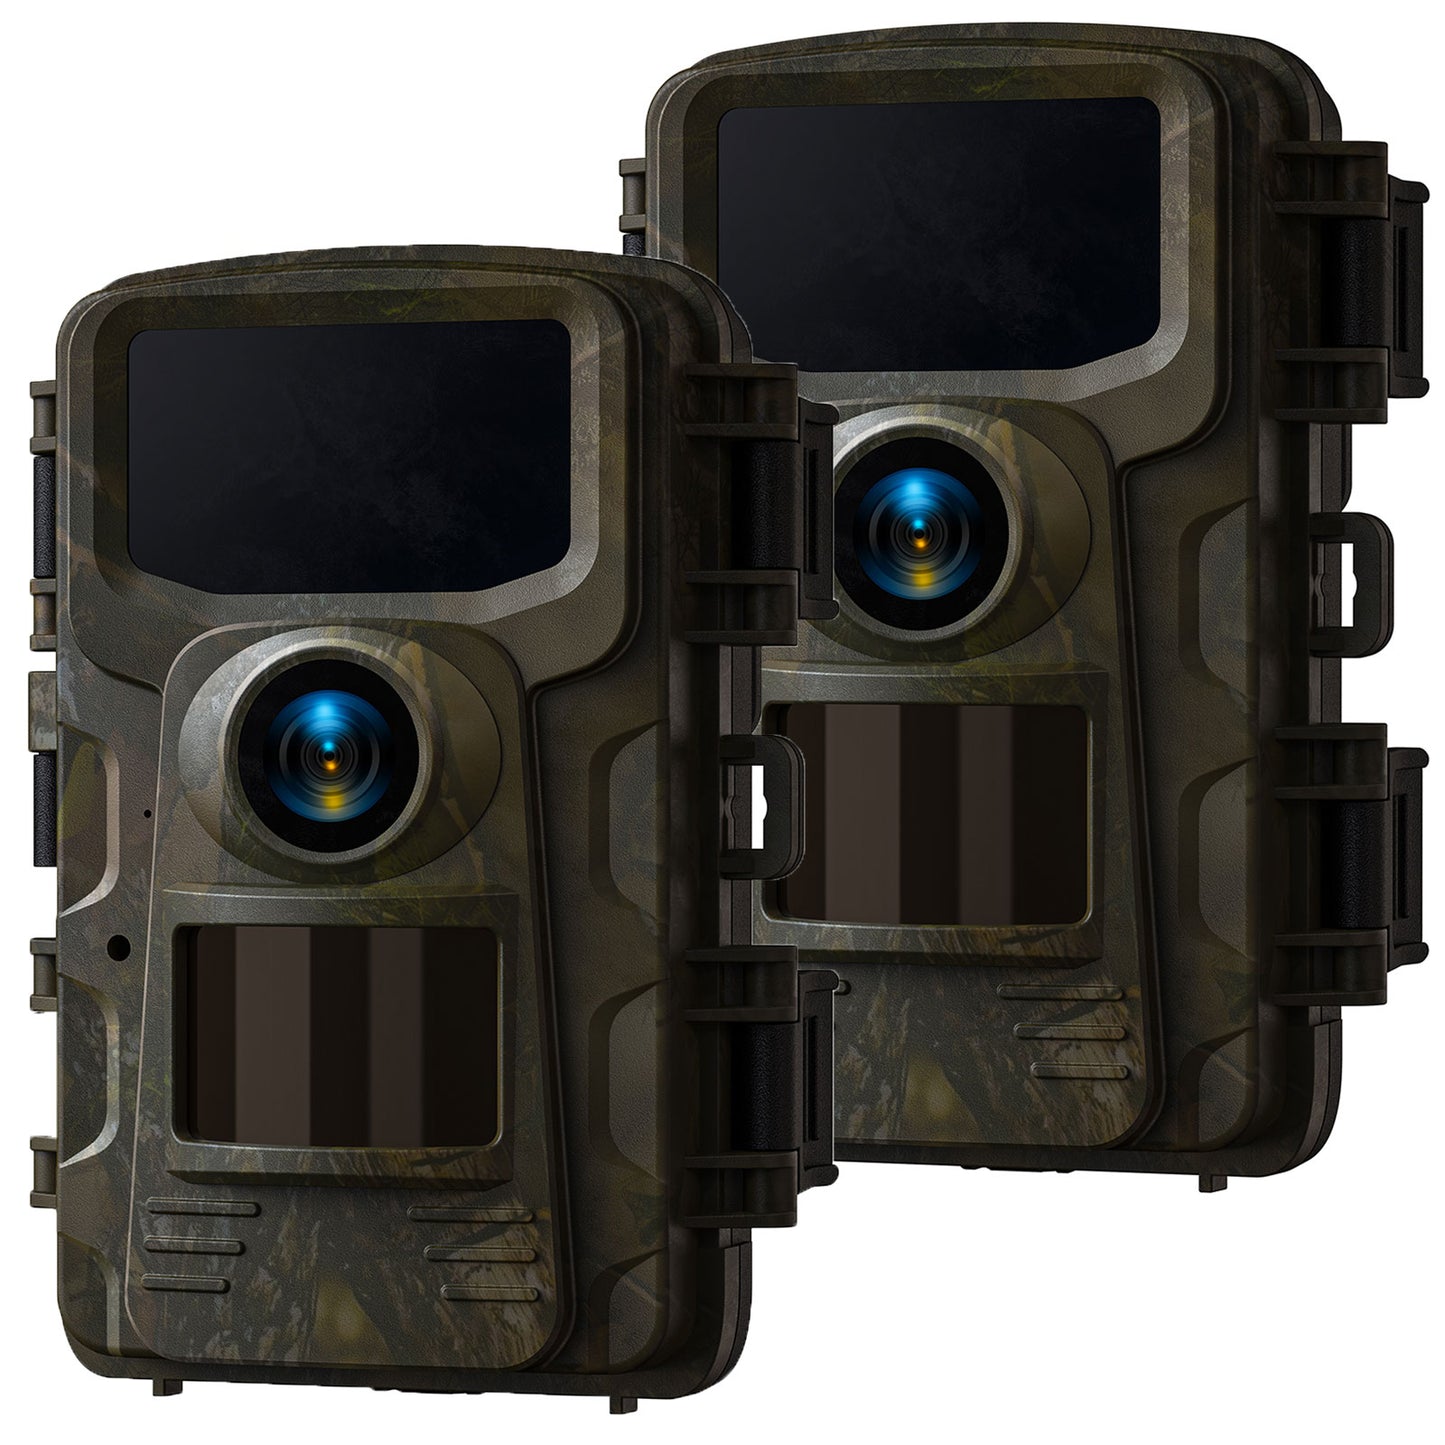 TOGUARD 2 Pack Trail Camera 2K 36MP Game Camera with Night Vision Motion Activated Waterproof 120°Wide-Angle Hunting Trail Cam with 850nm Night Vision Infrared LED 2.0"LCD for Wildlife Monitoring